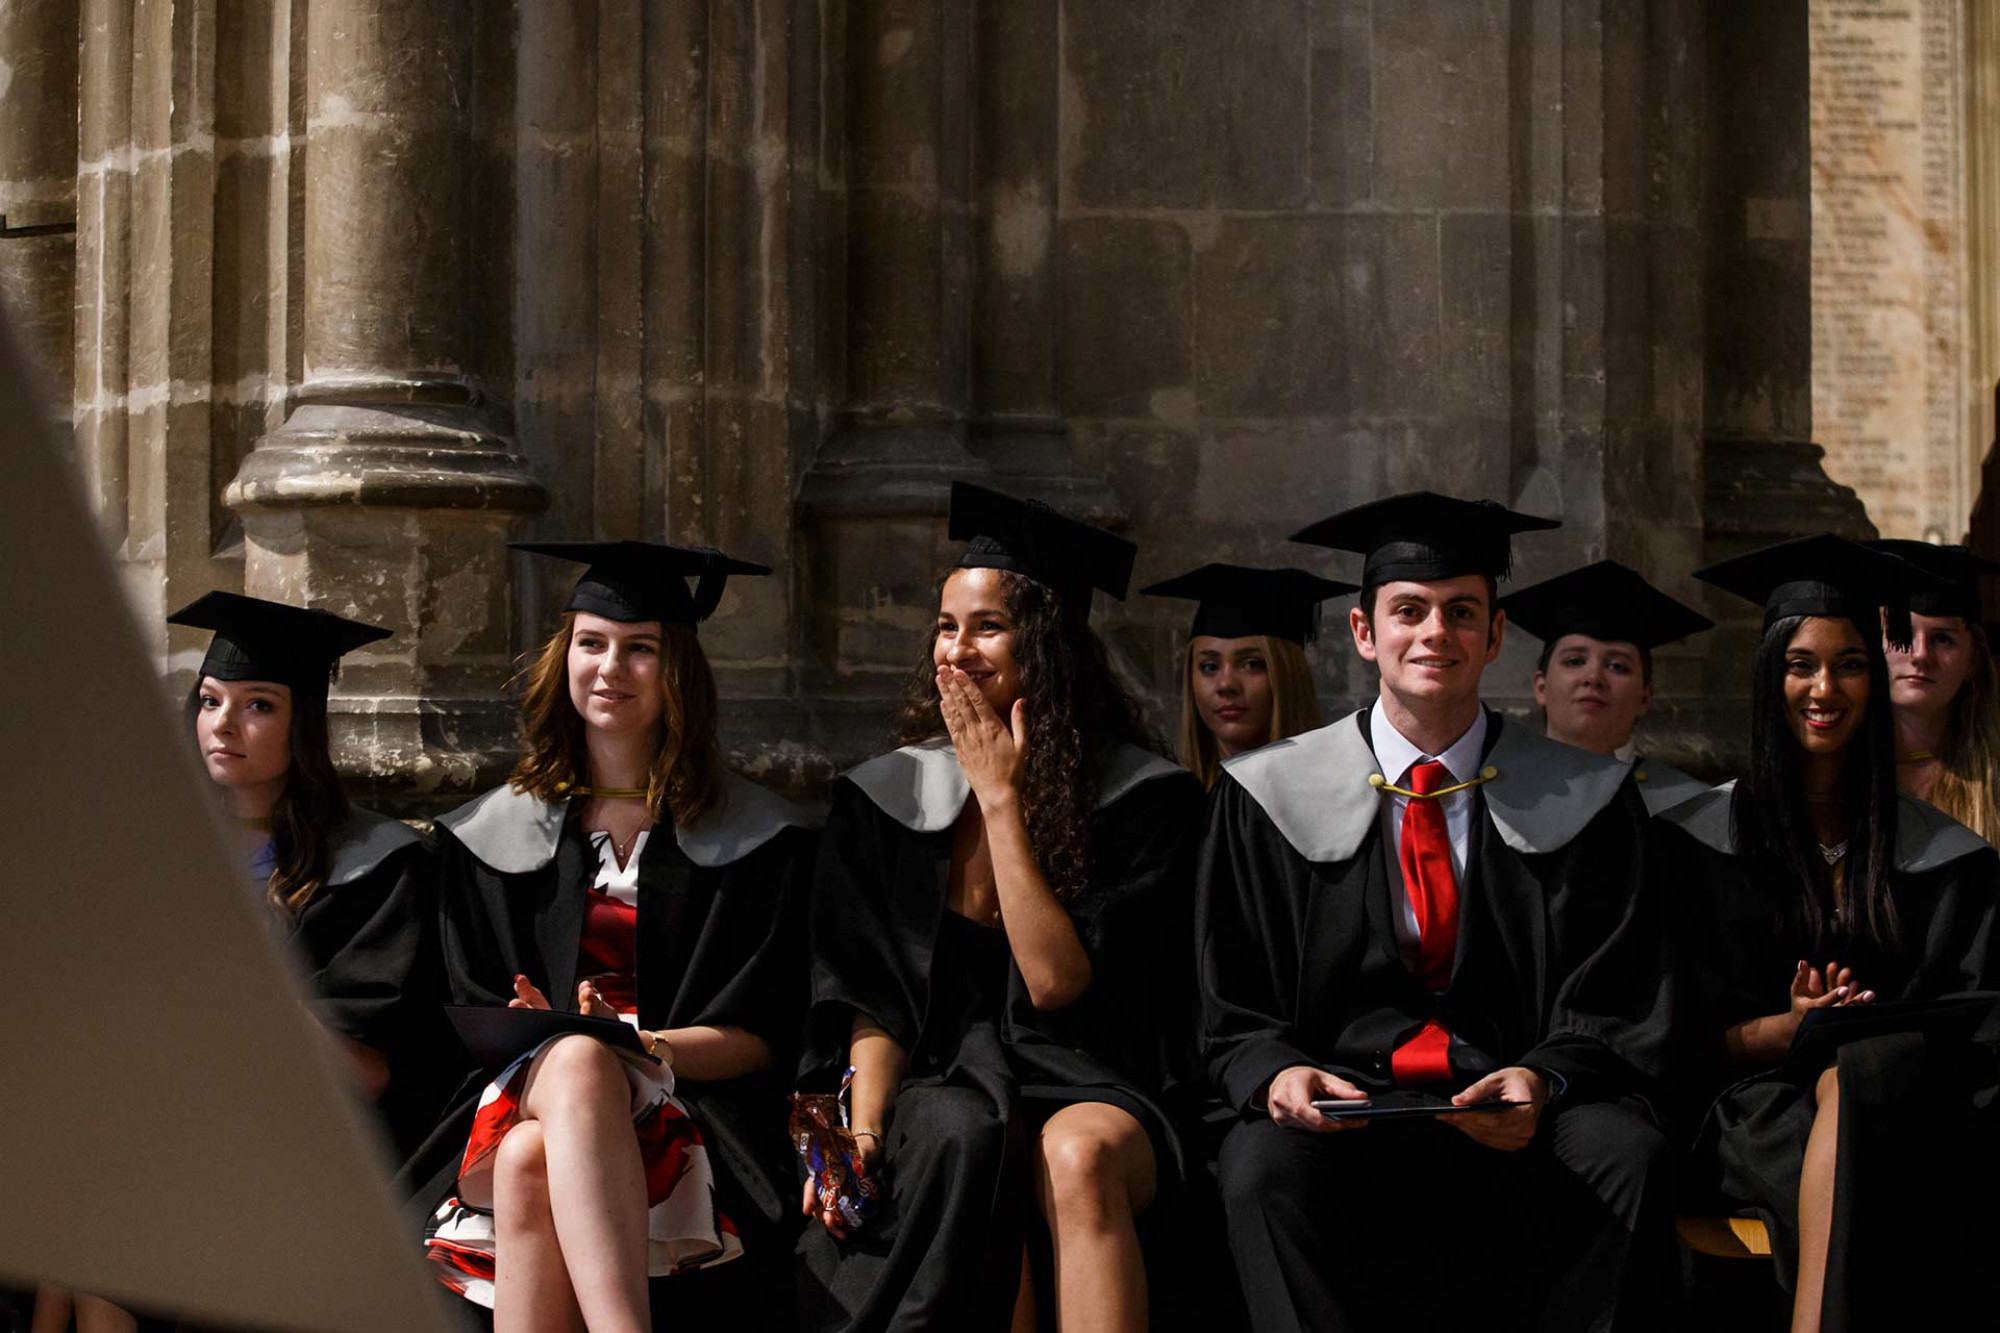 Students waiting to graduate inside the Cathedral